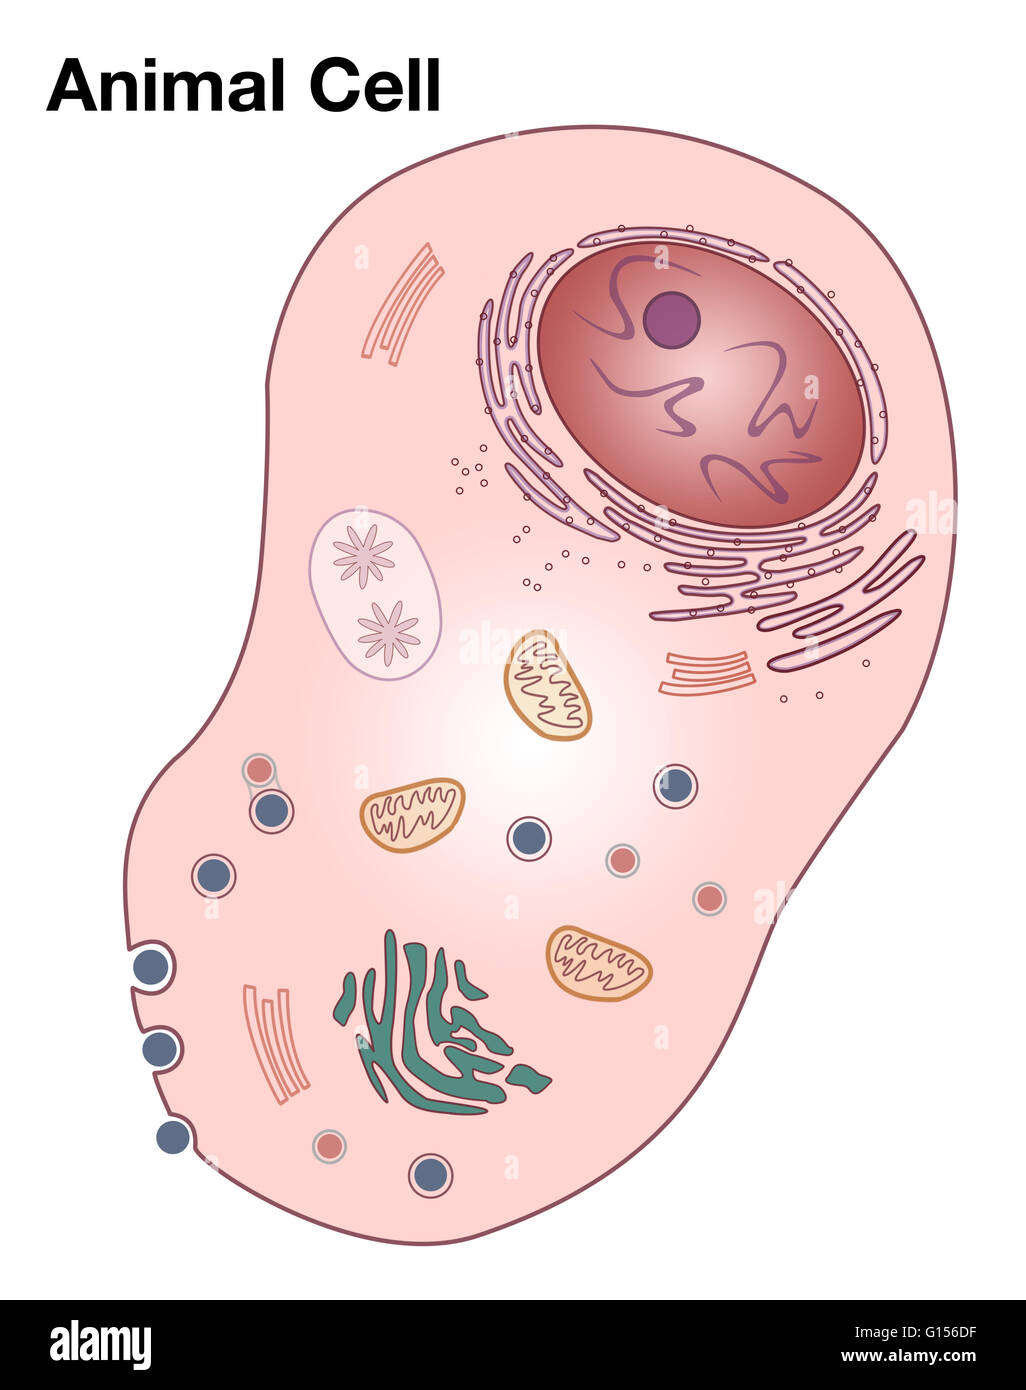 Diagram of a typical animal cell. Stock Photo